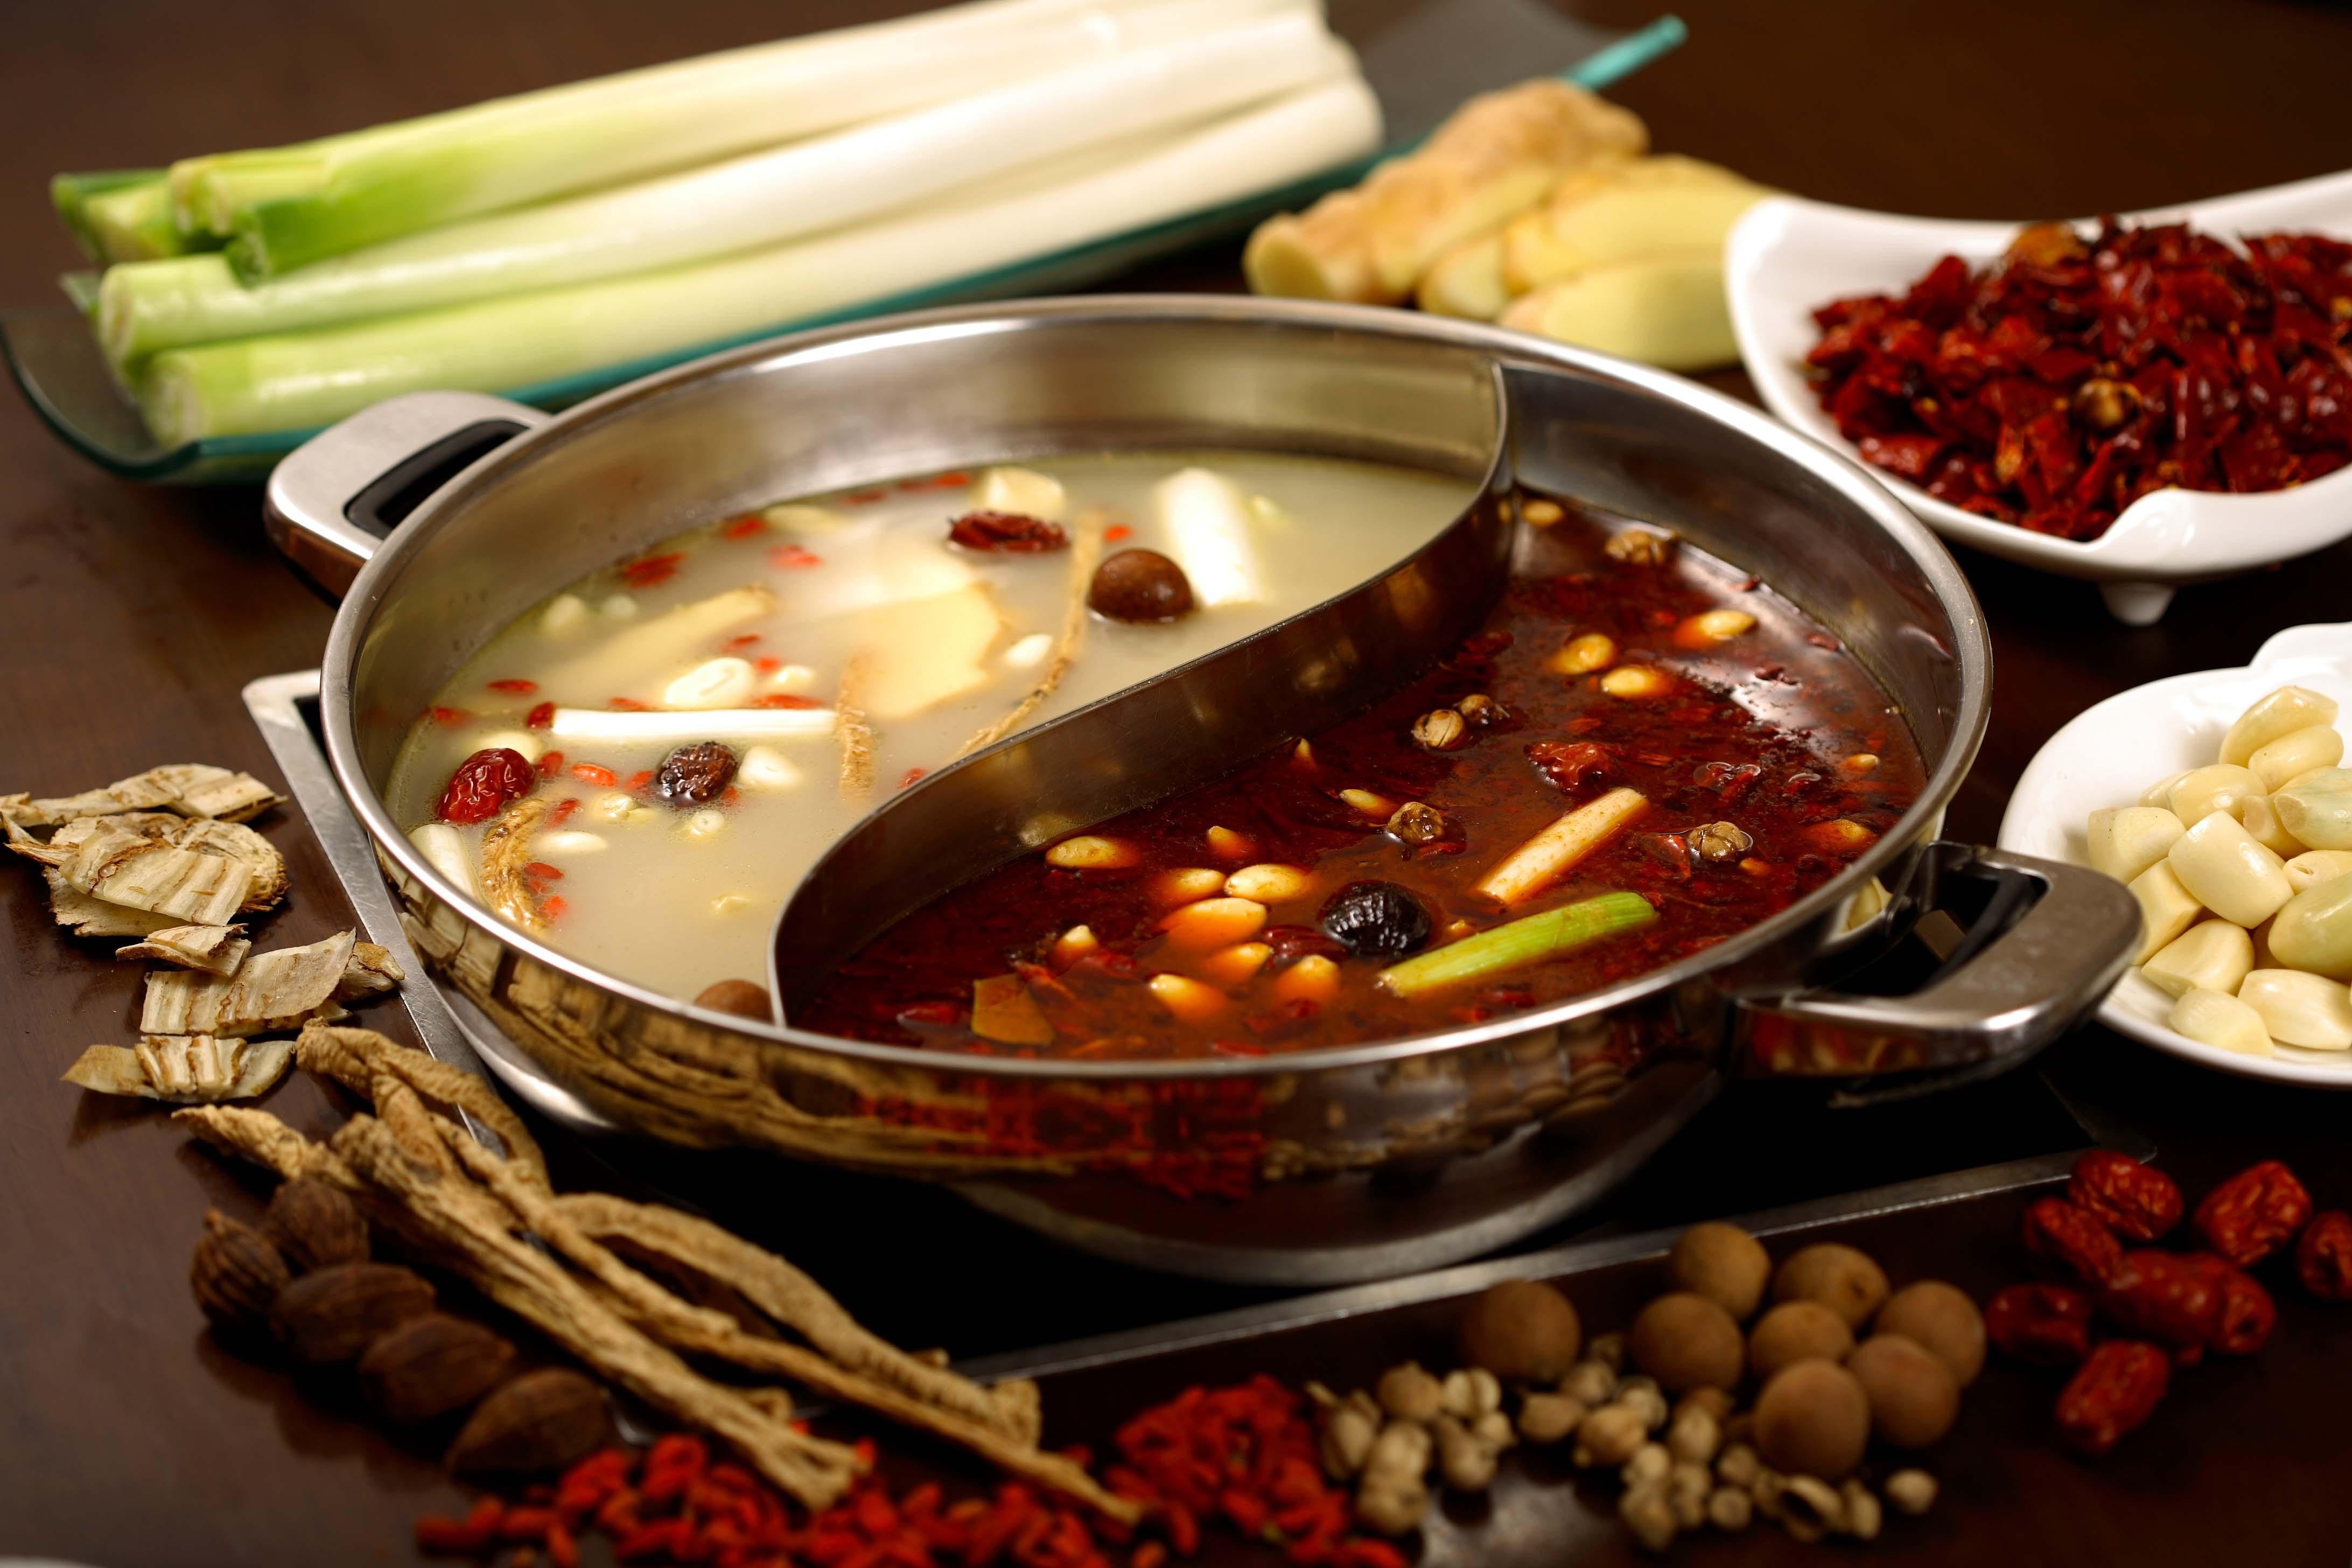 Chongqing has come up with guidelines for hotpot restaurants. Photo: Handout